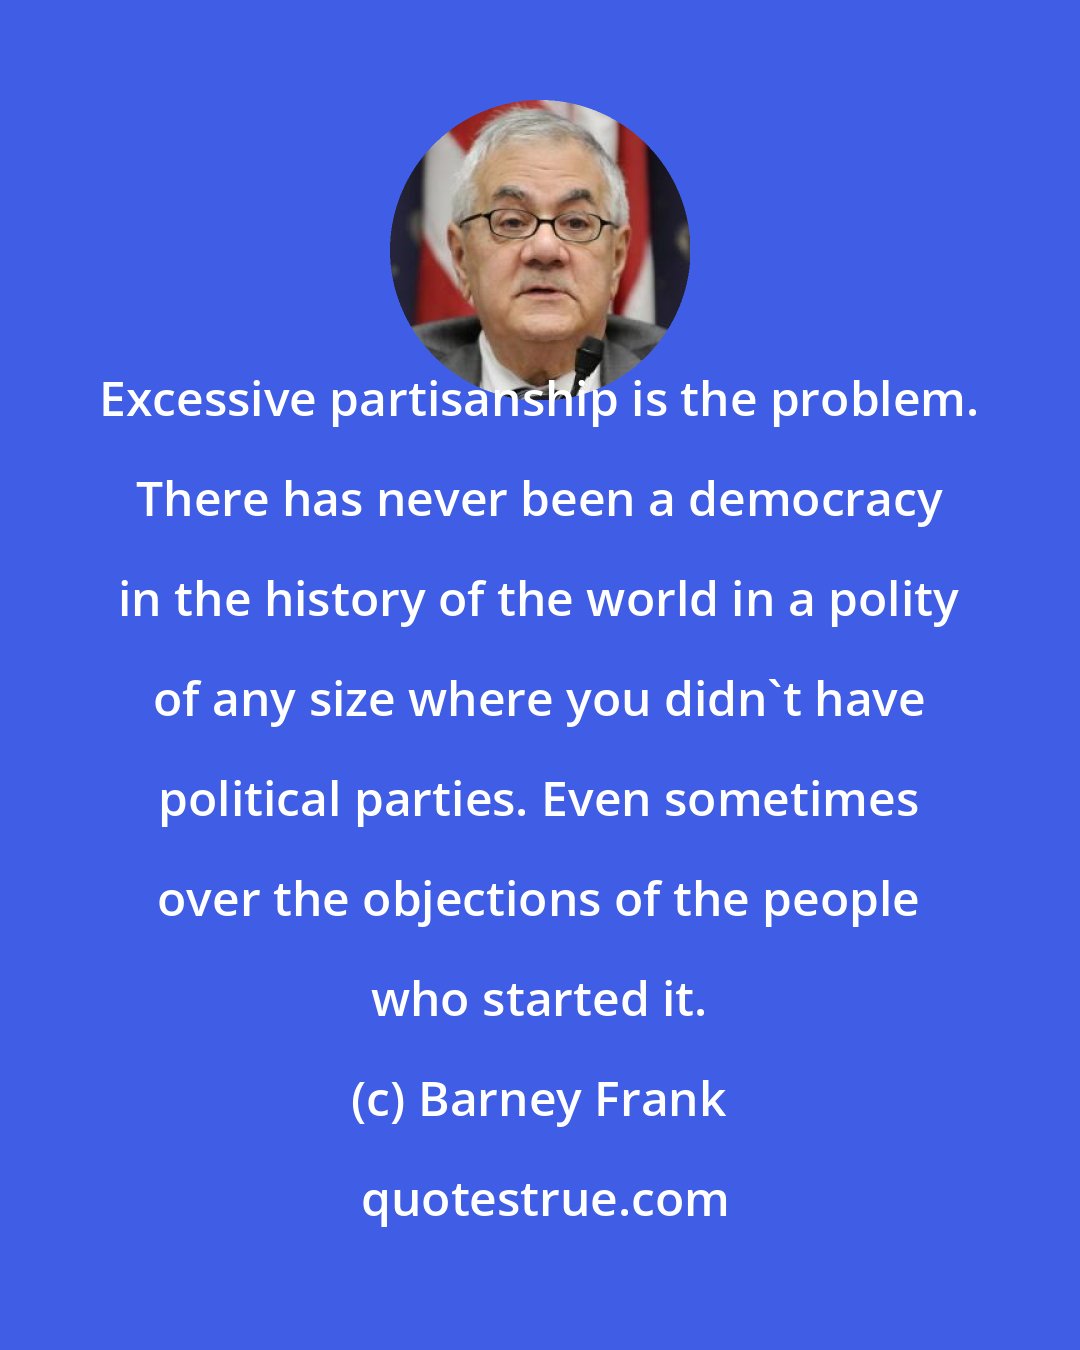 Barney Frank: Excessive partisanship is the problem. There has never been a democracy in the history of the world in a polity of any size where you didn't have political parties. Even sometimes over the objections of the people who started it.